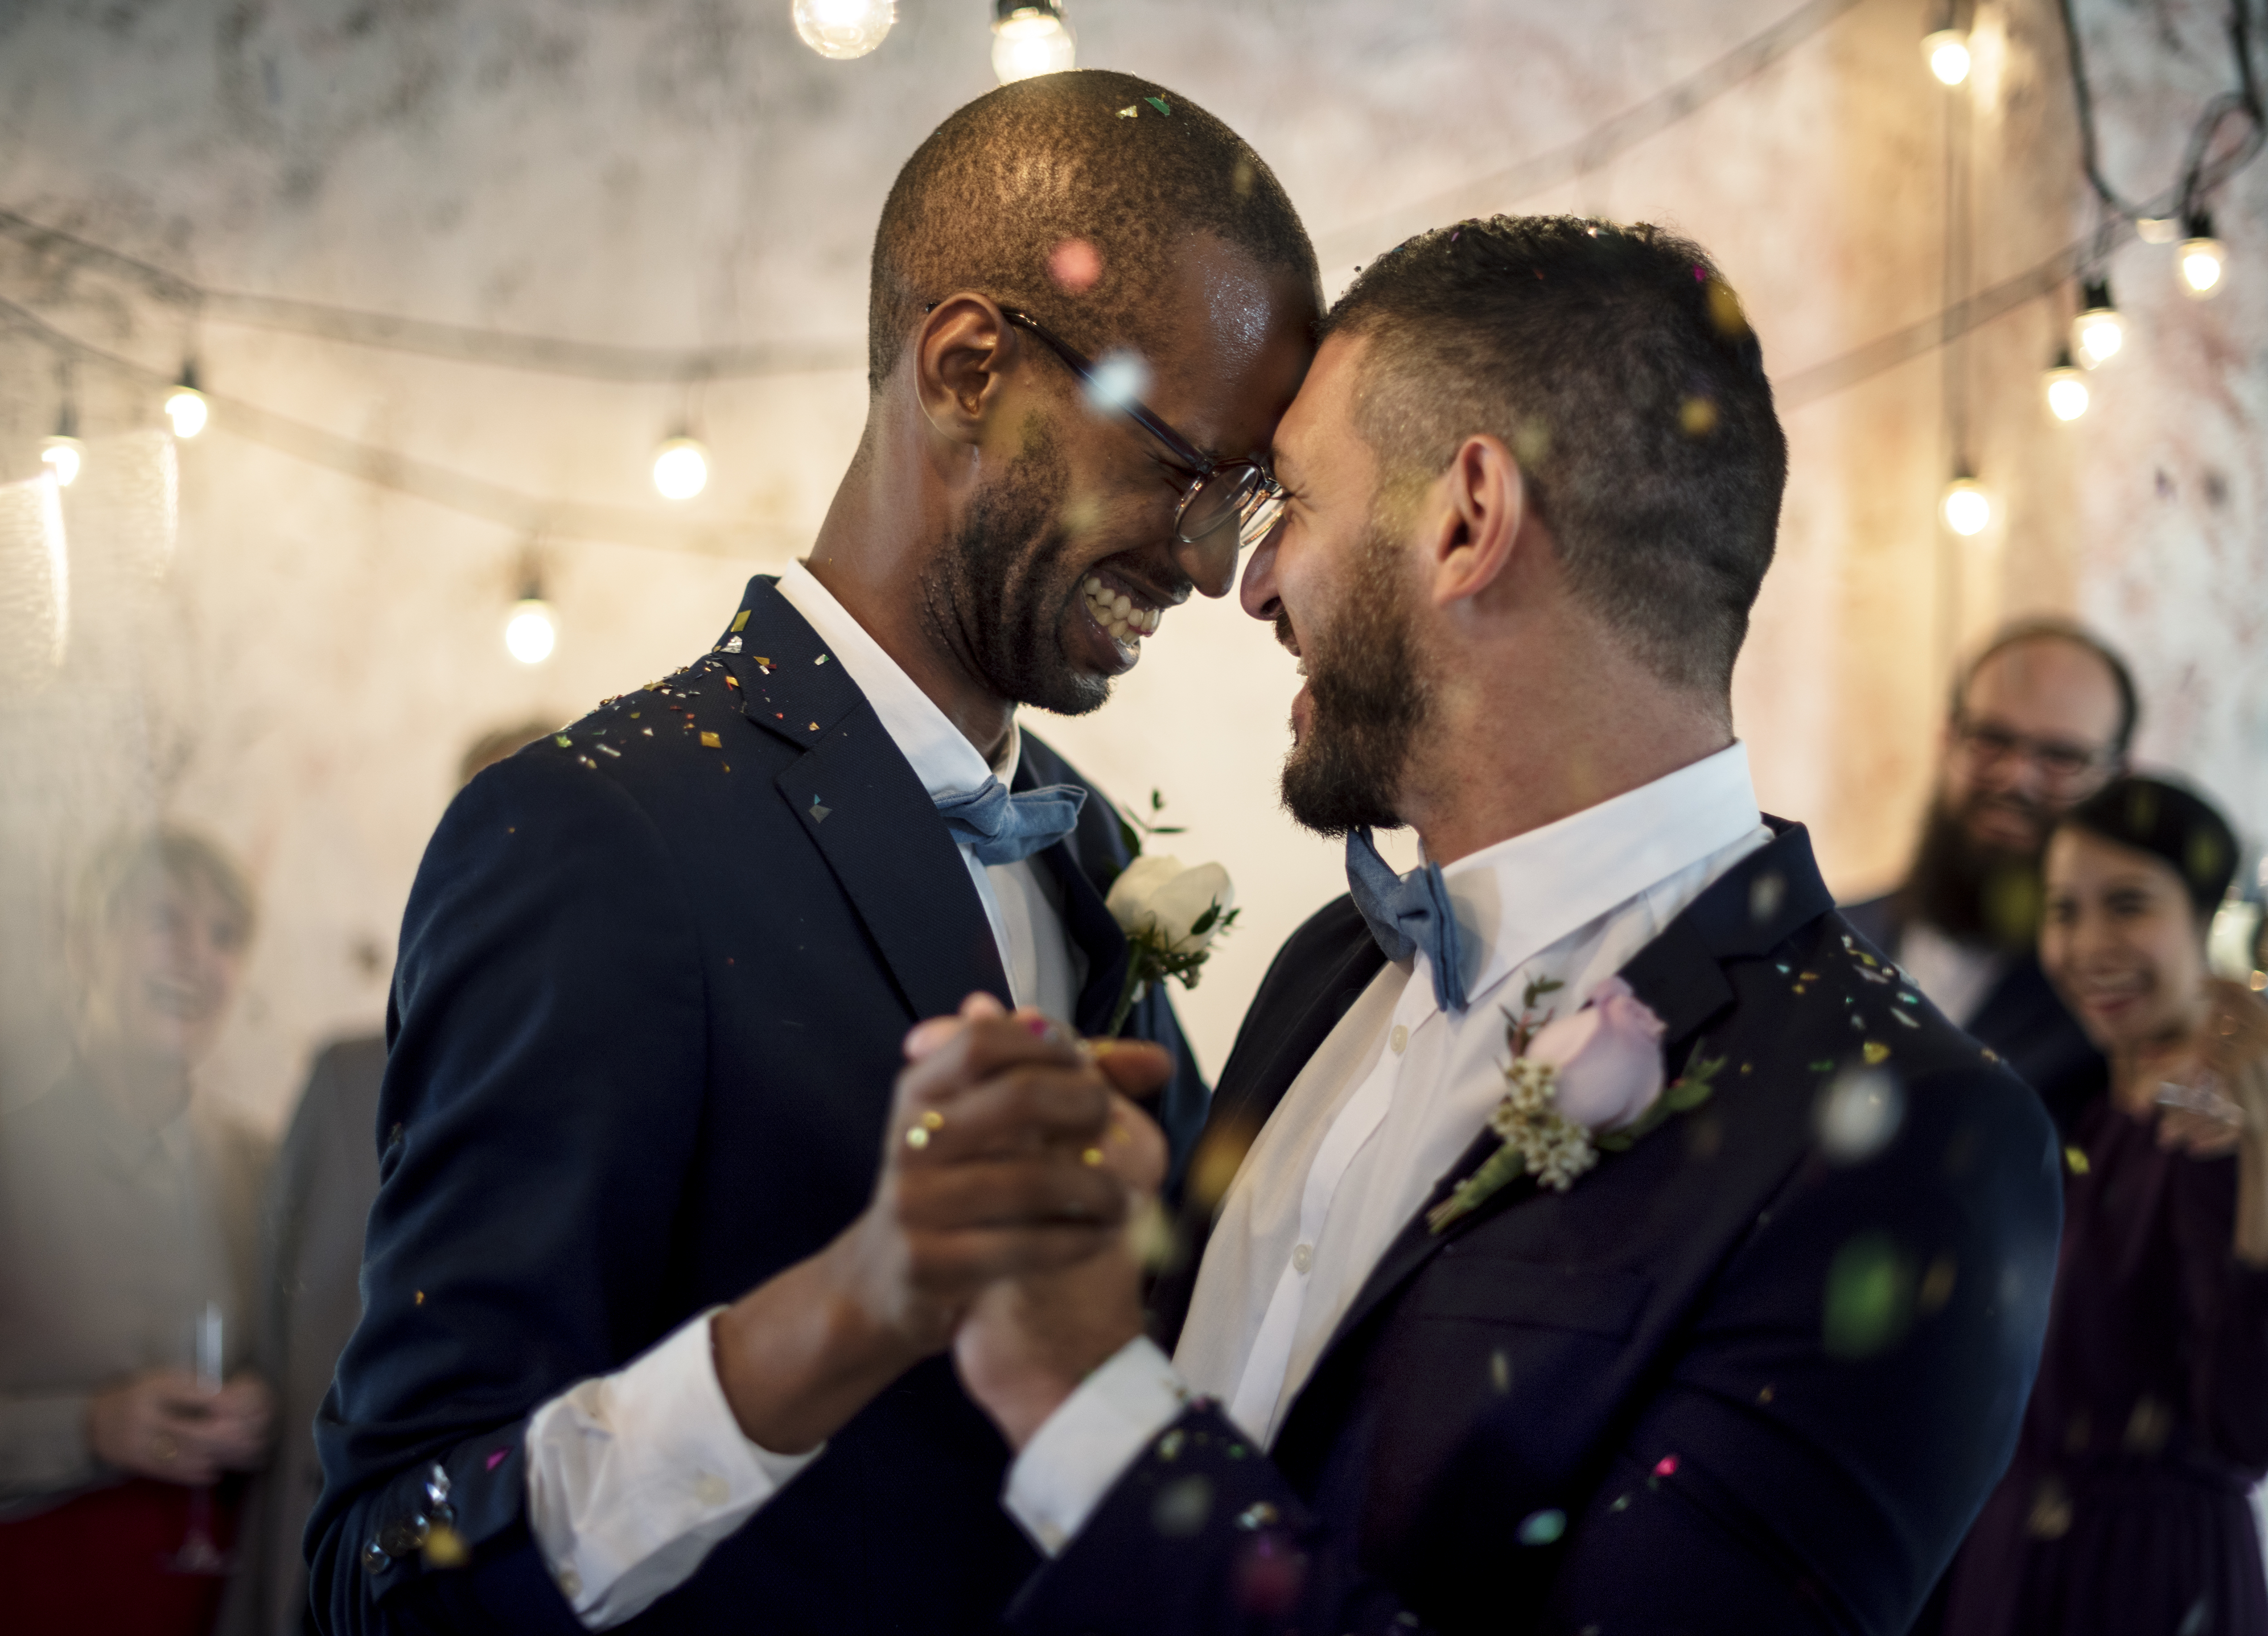 A close-up photo of a newlywed gay couple | Source: Shutterstock